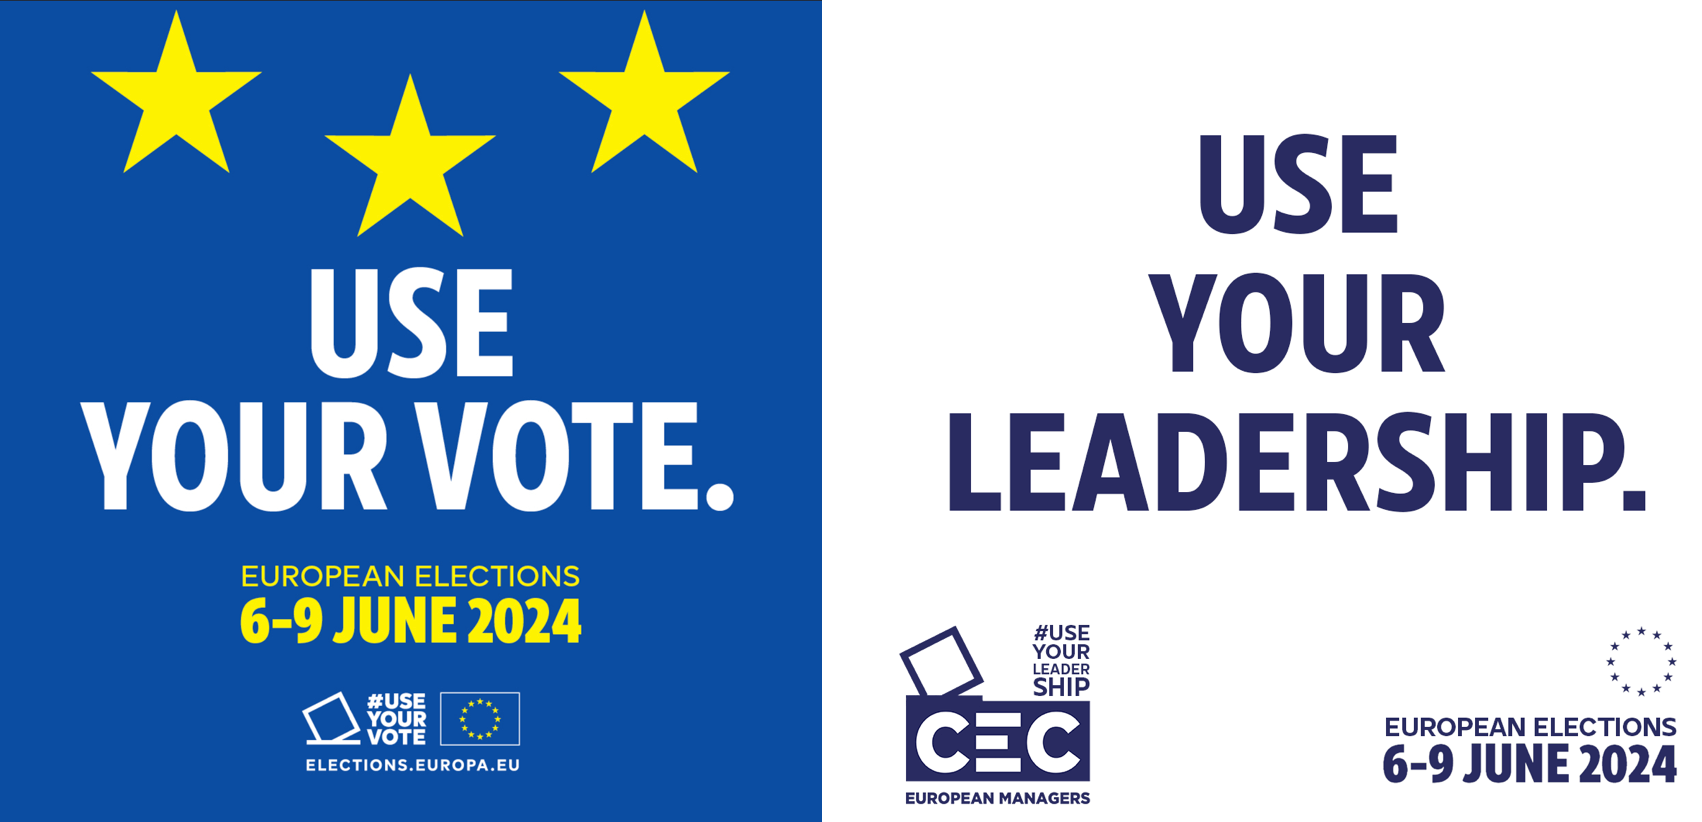 Managers’ Priorities for the European elections in 2024 is a call for pragmatism, dialogue, and adapted ways of governance.